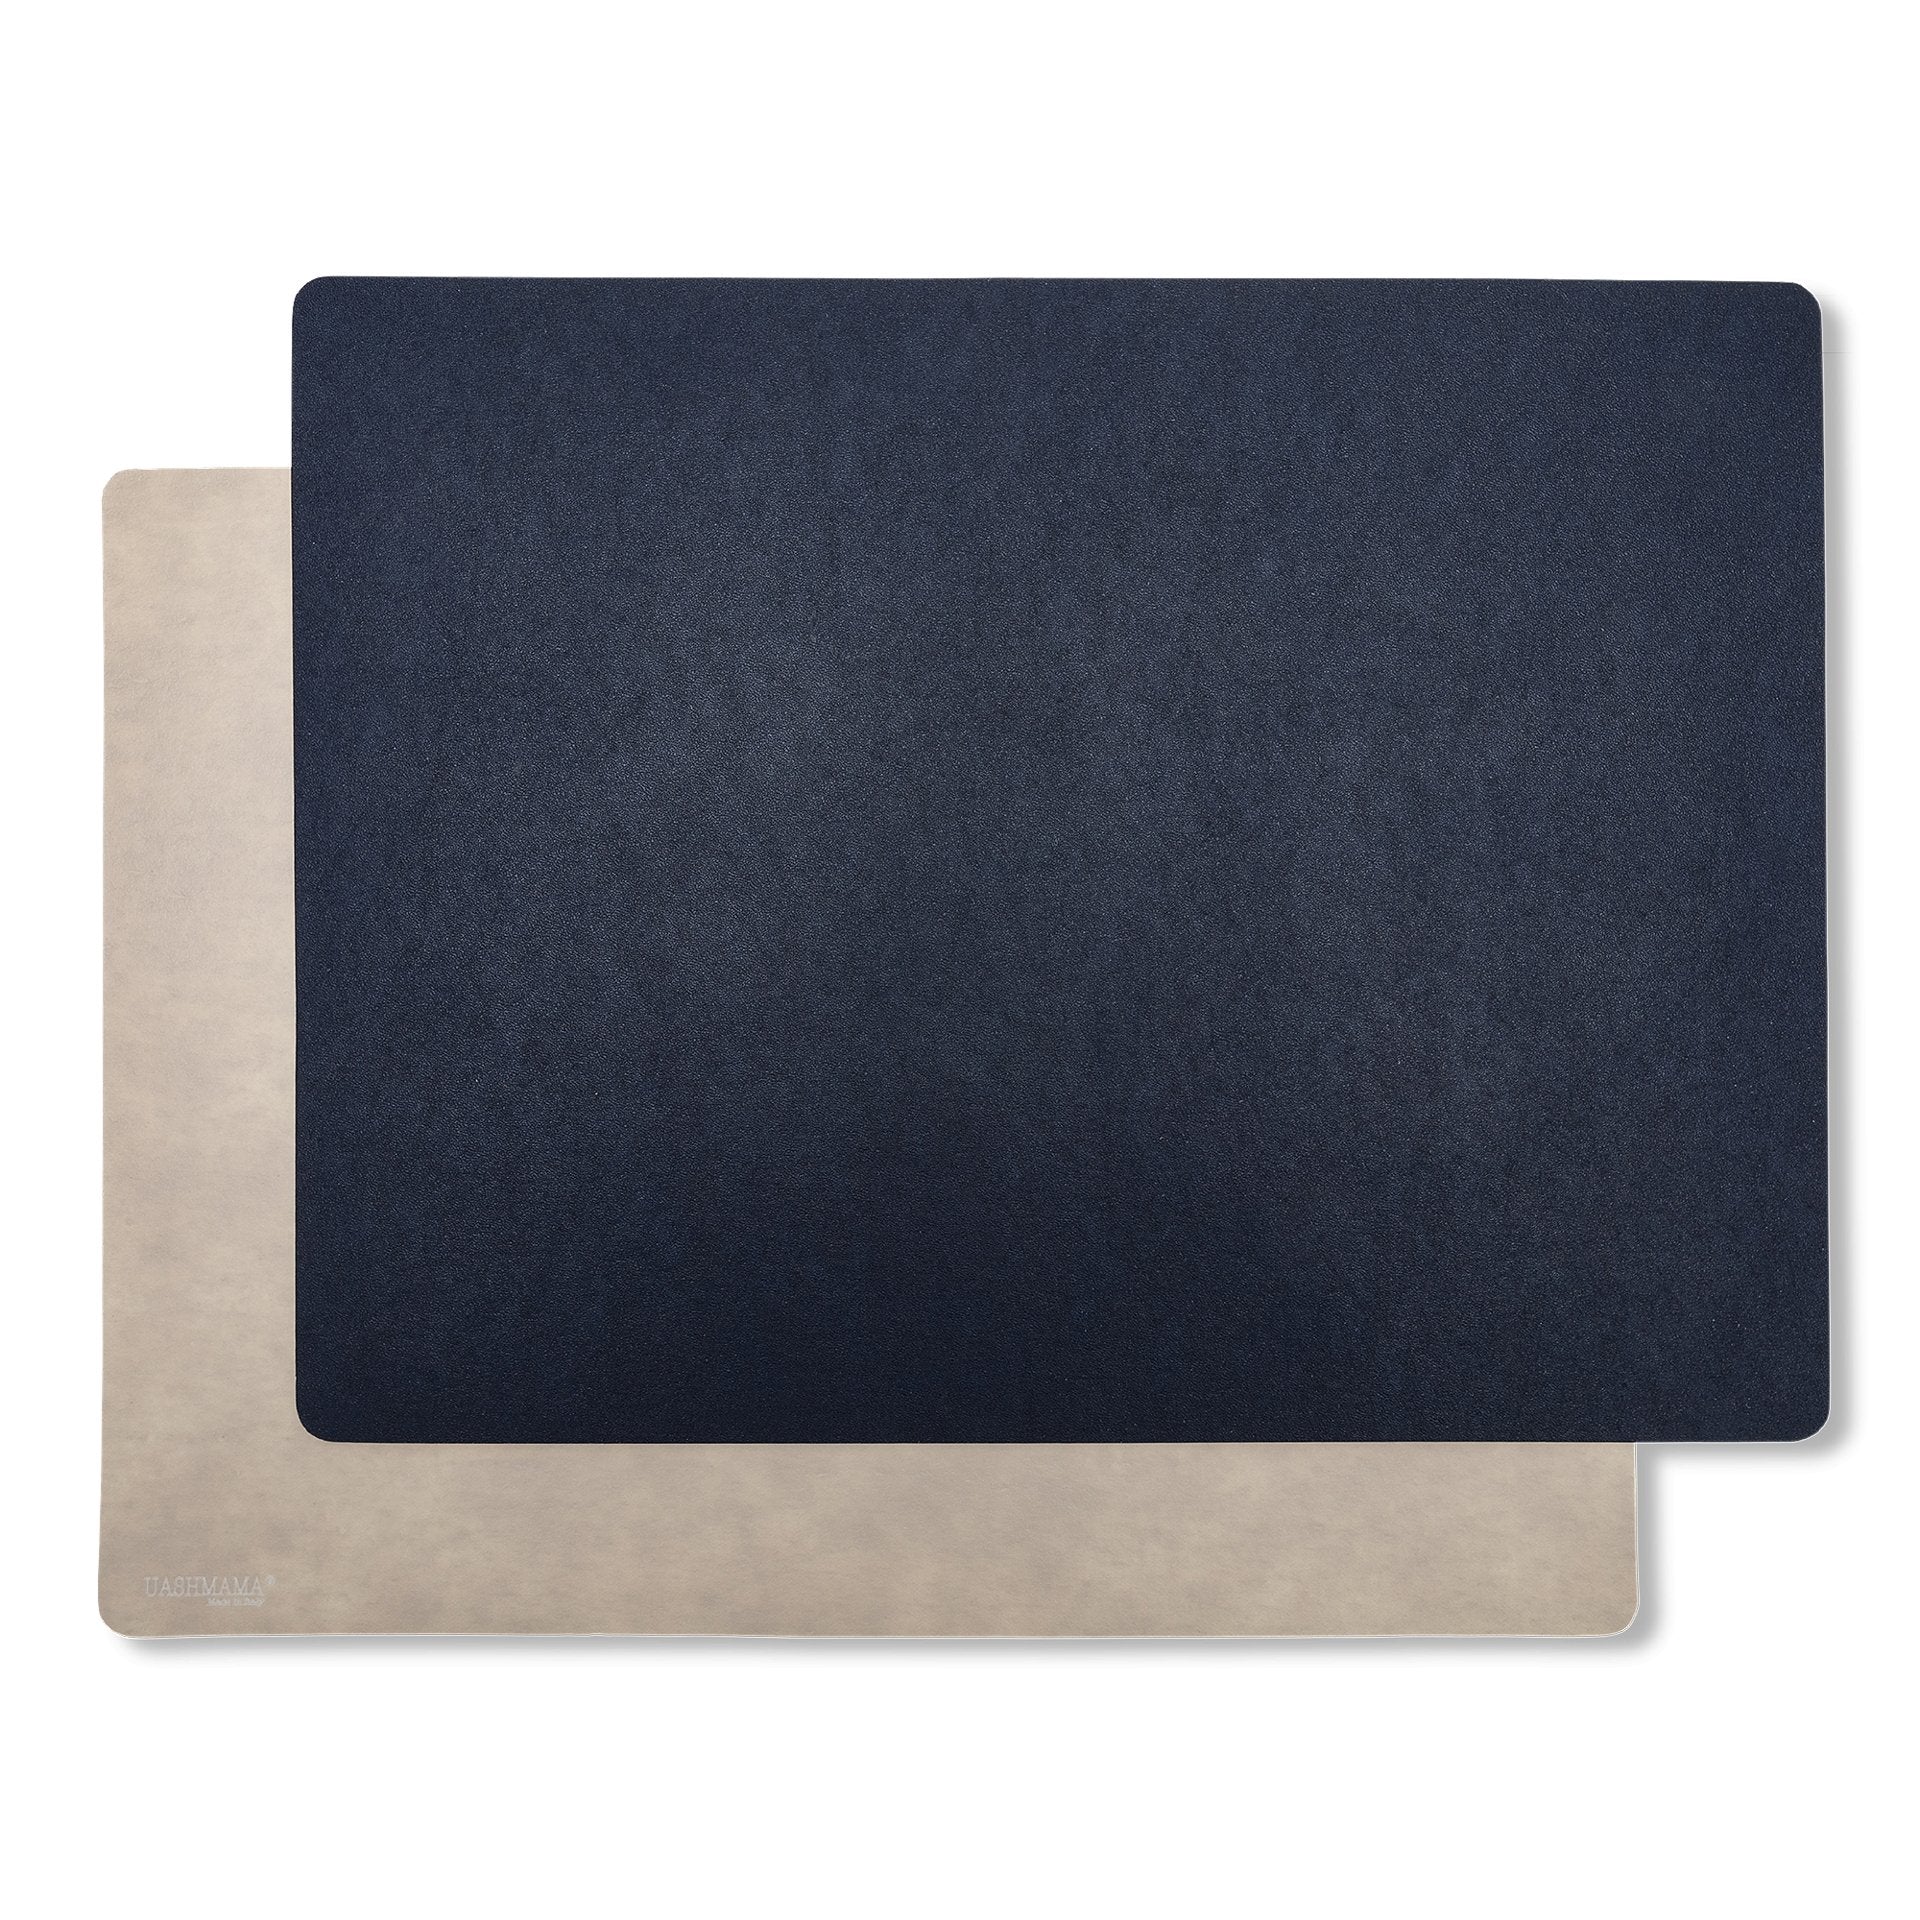 Two rectangular washable paper placemats are stacked one on top of the other. The one in the foreground is navy and the one at rear is beige.